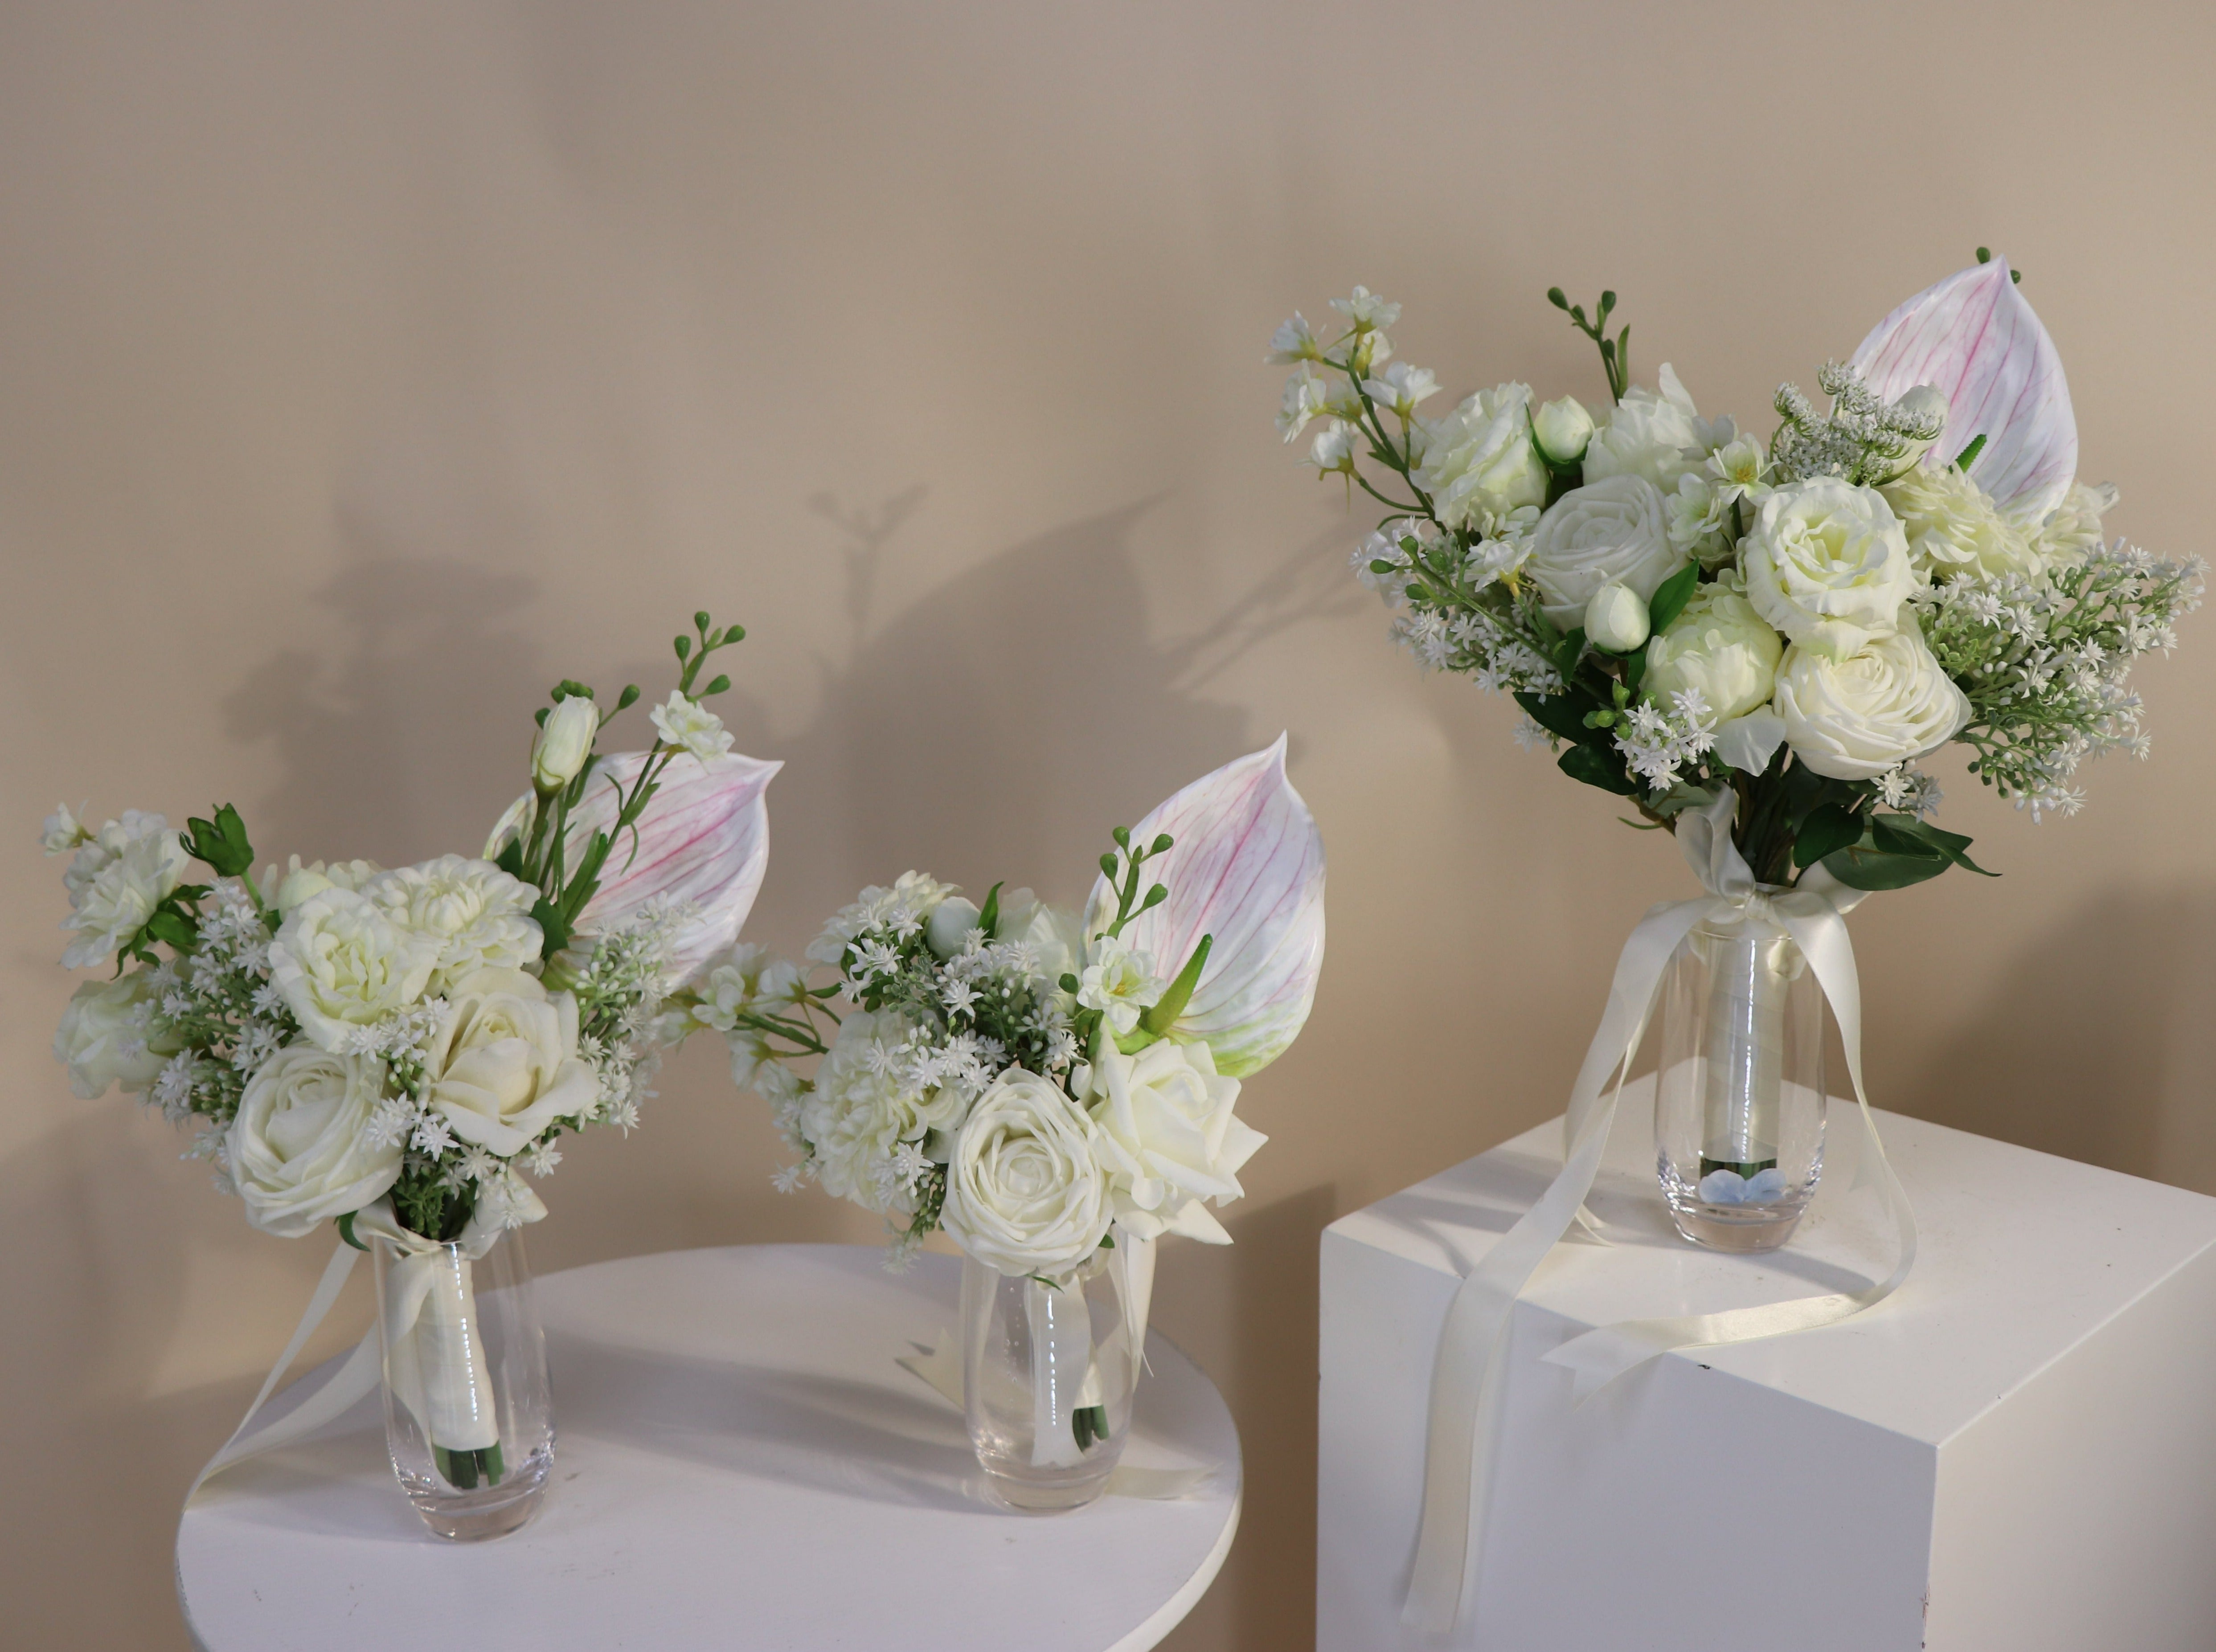 Sophisticated White - Bouquets (3 sizes)